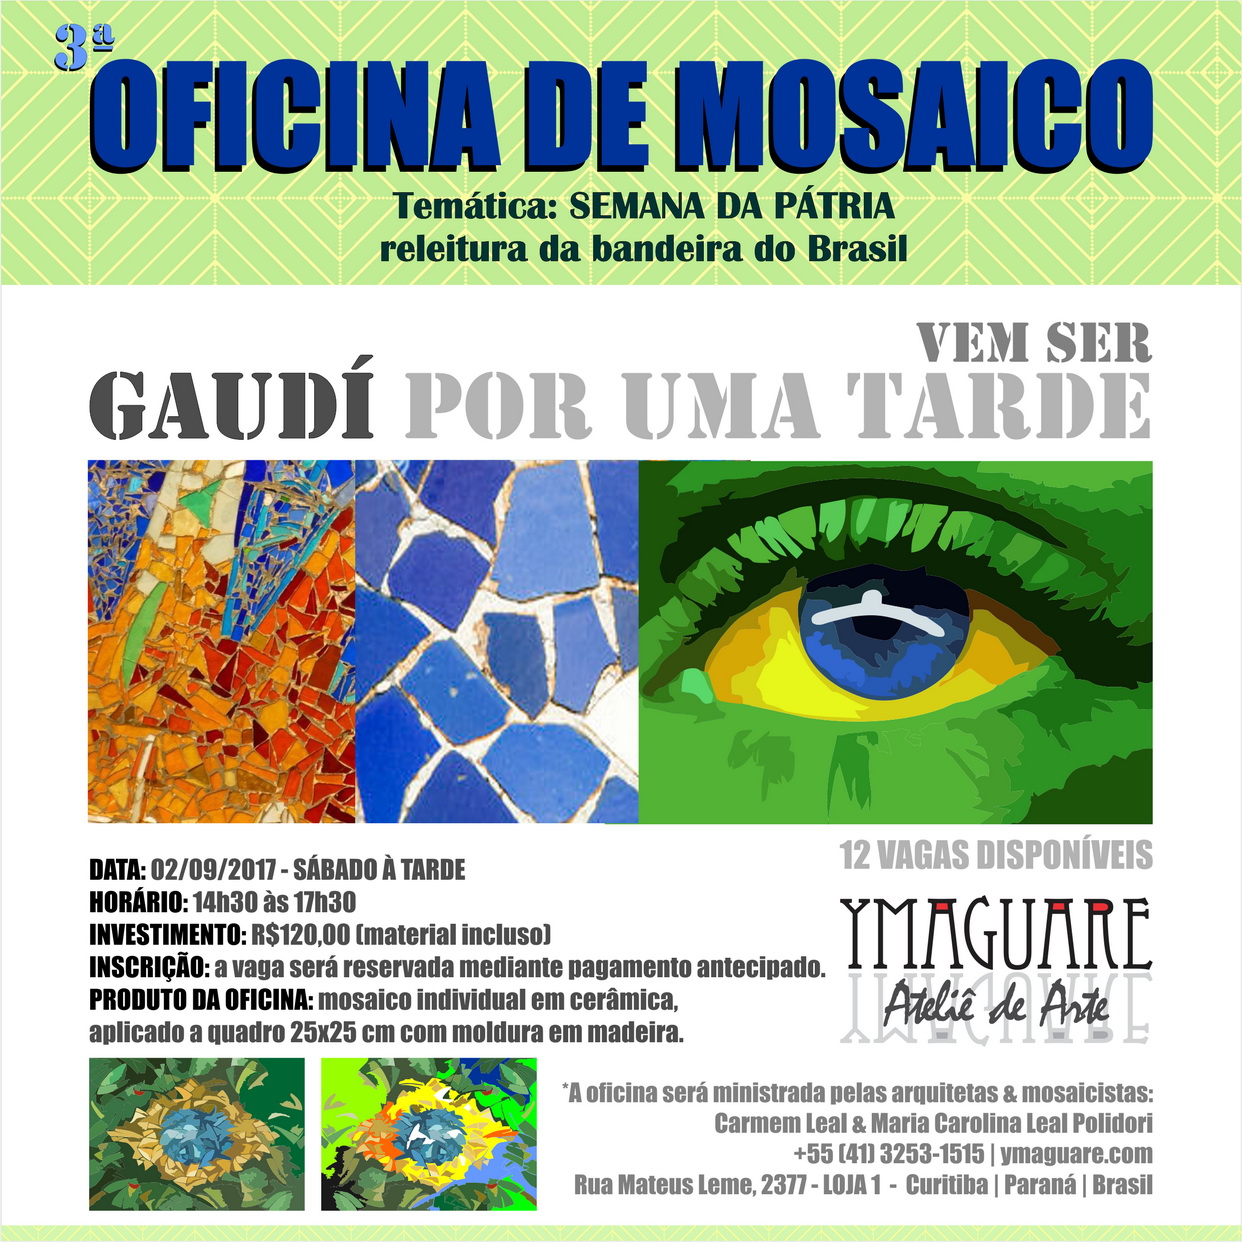 YMAGUARE - Flayer Ofinica Gaudi BANDEIRA 02-09-2017 B_resize